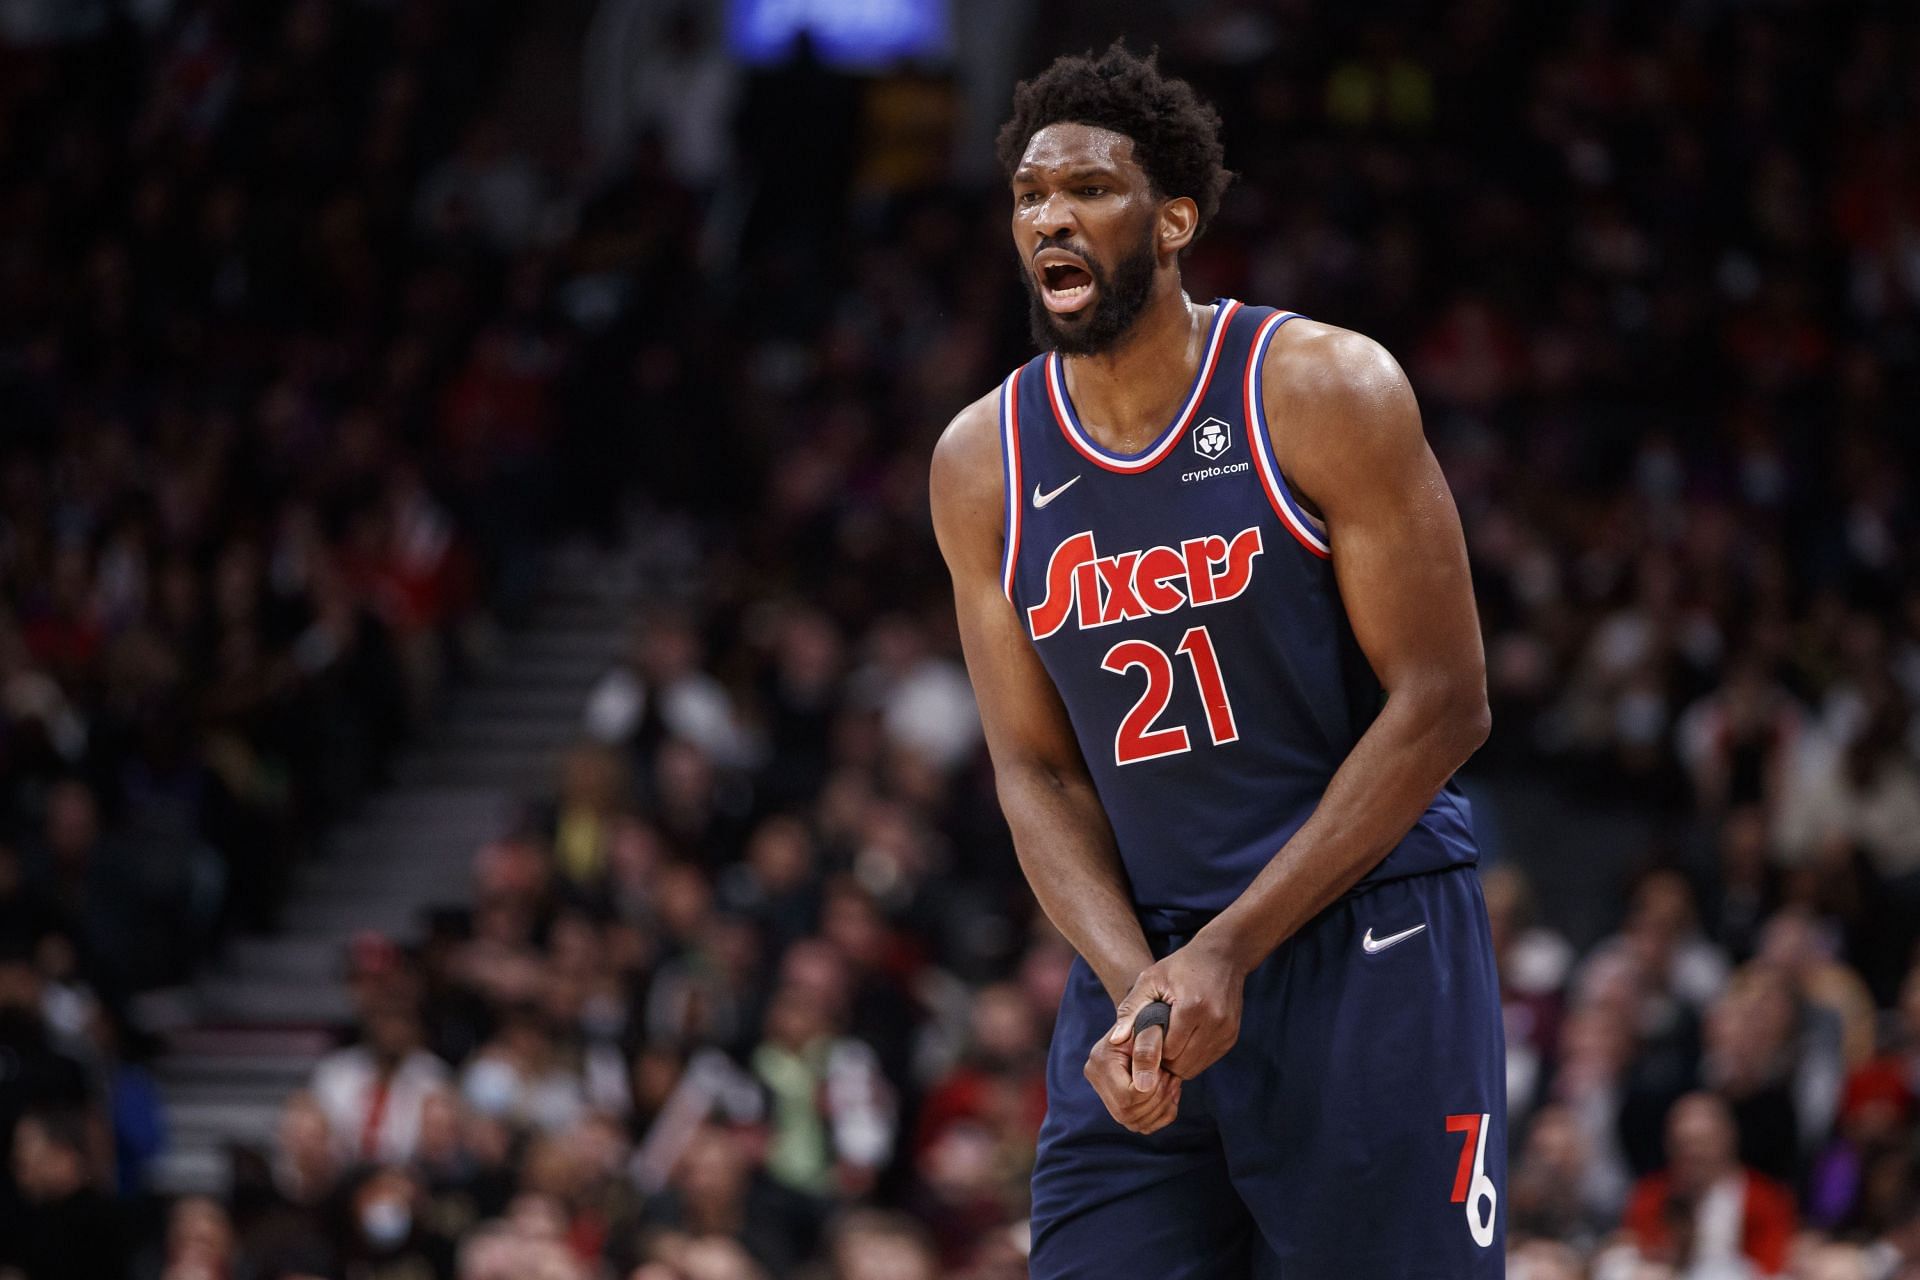 Philadelphia 76ers superstar Joel Embiid had 33 points, 13 rebounds, and a game-winner in Game 3 against the Toronto Raptors.